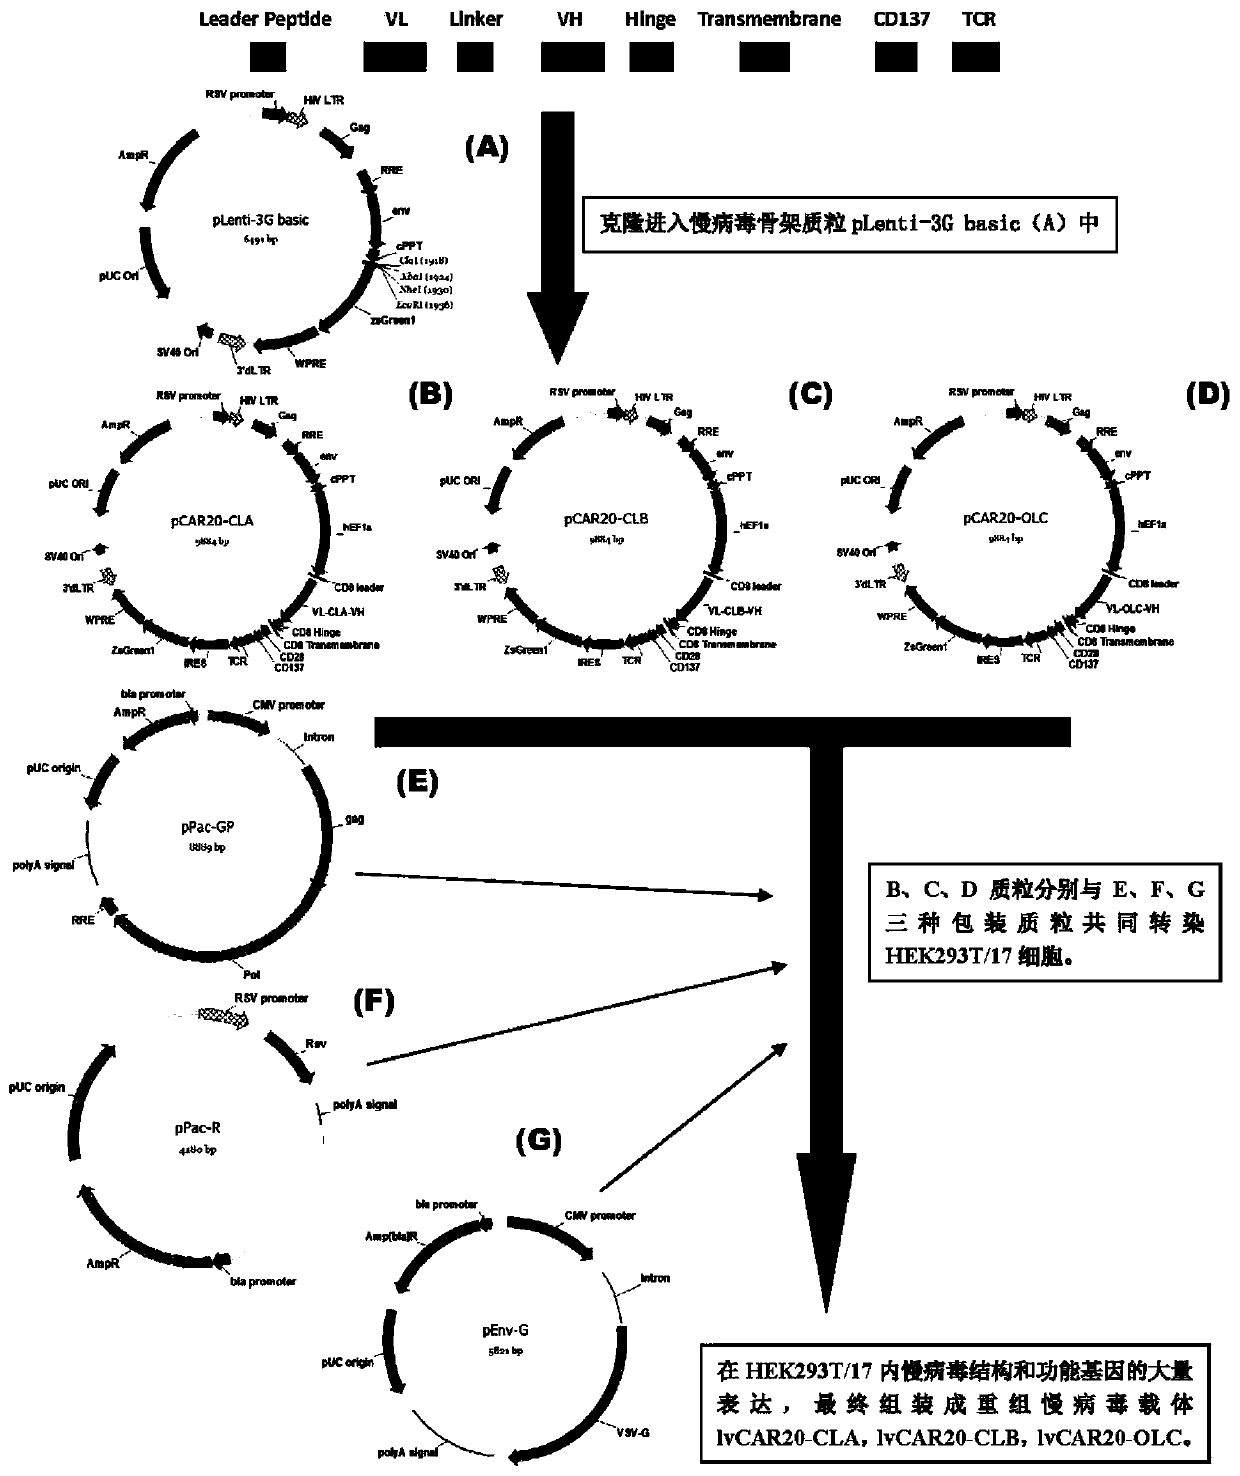 Anti-cd20 chimeric antigen receptor, coding gene, recombinant expression vector and its construction method and application